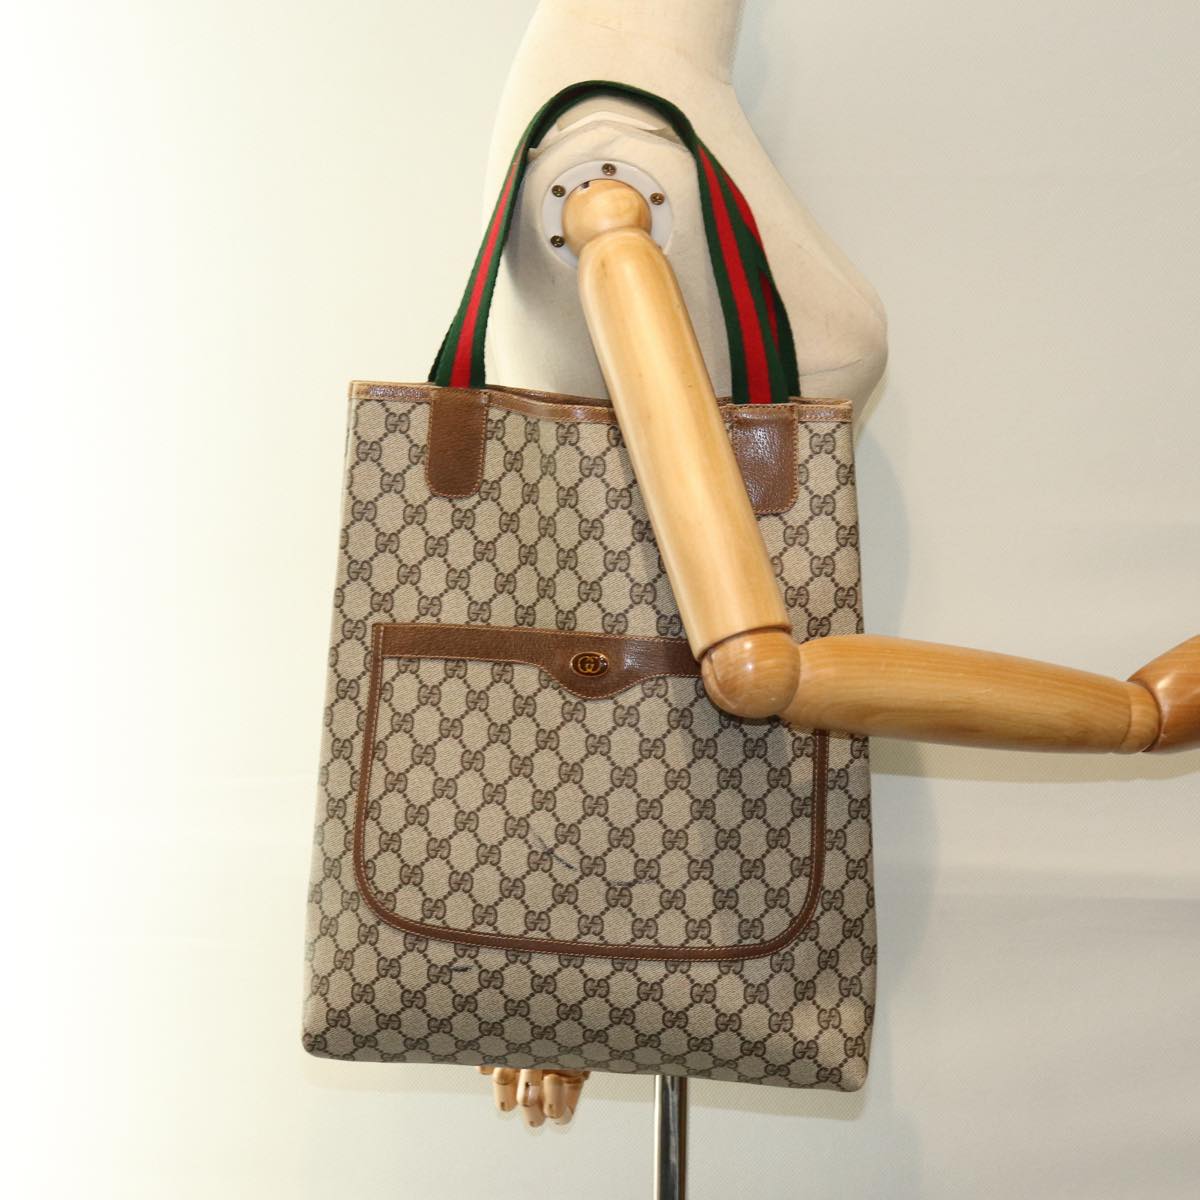 GUCCI GG Supreme Web Sherry Line Tote Bag Beige Red Green 001 080 494 Auth 73985